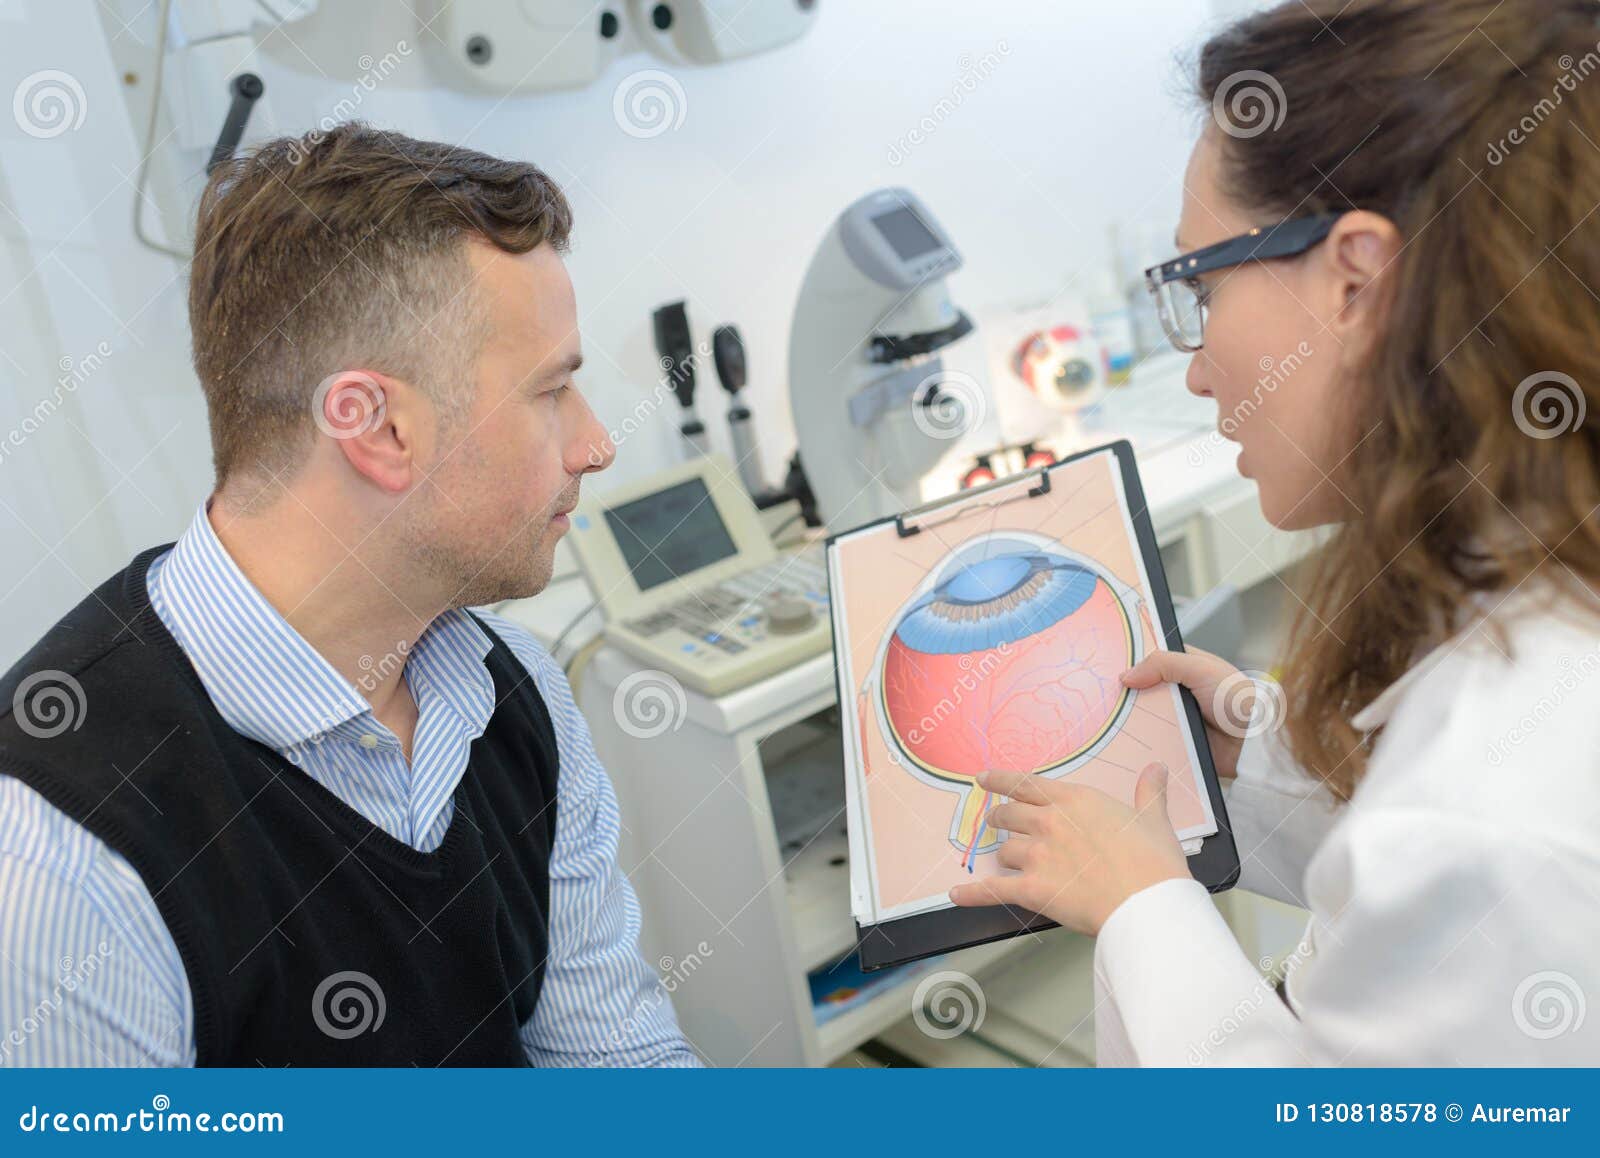 man with glaucoma consulting ophtalmologist for examination